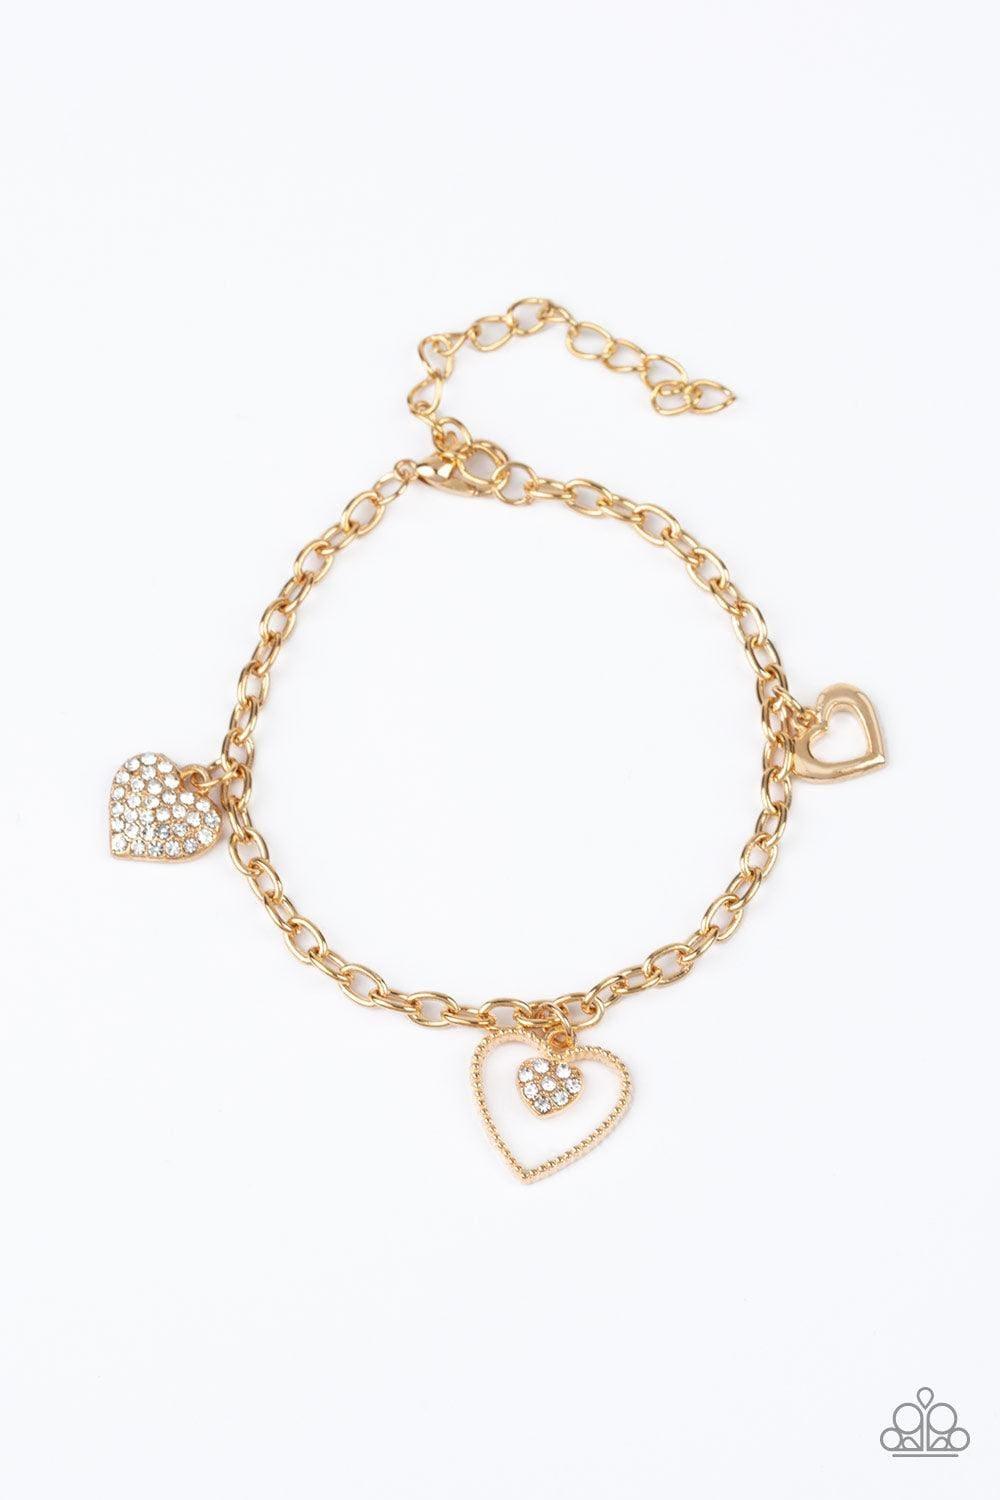 Paparazzi Accessories - Hearts And Harps - Gold Bracelet - Bling by JessieK